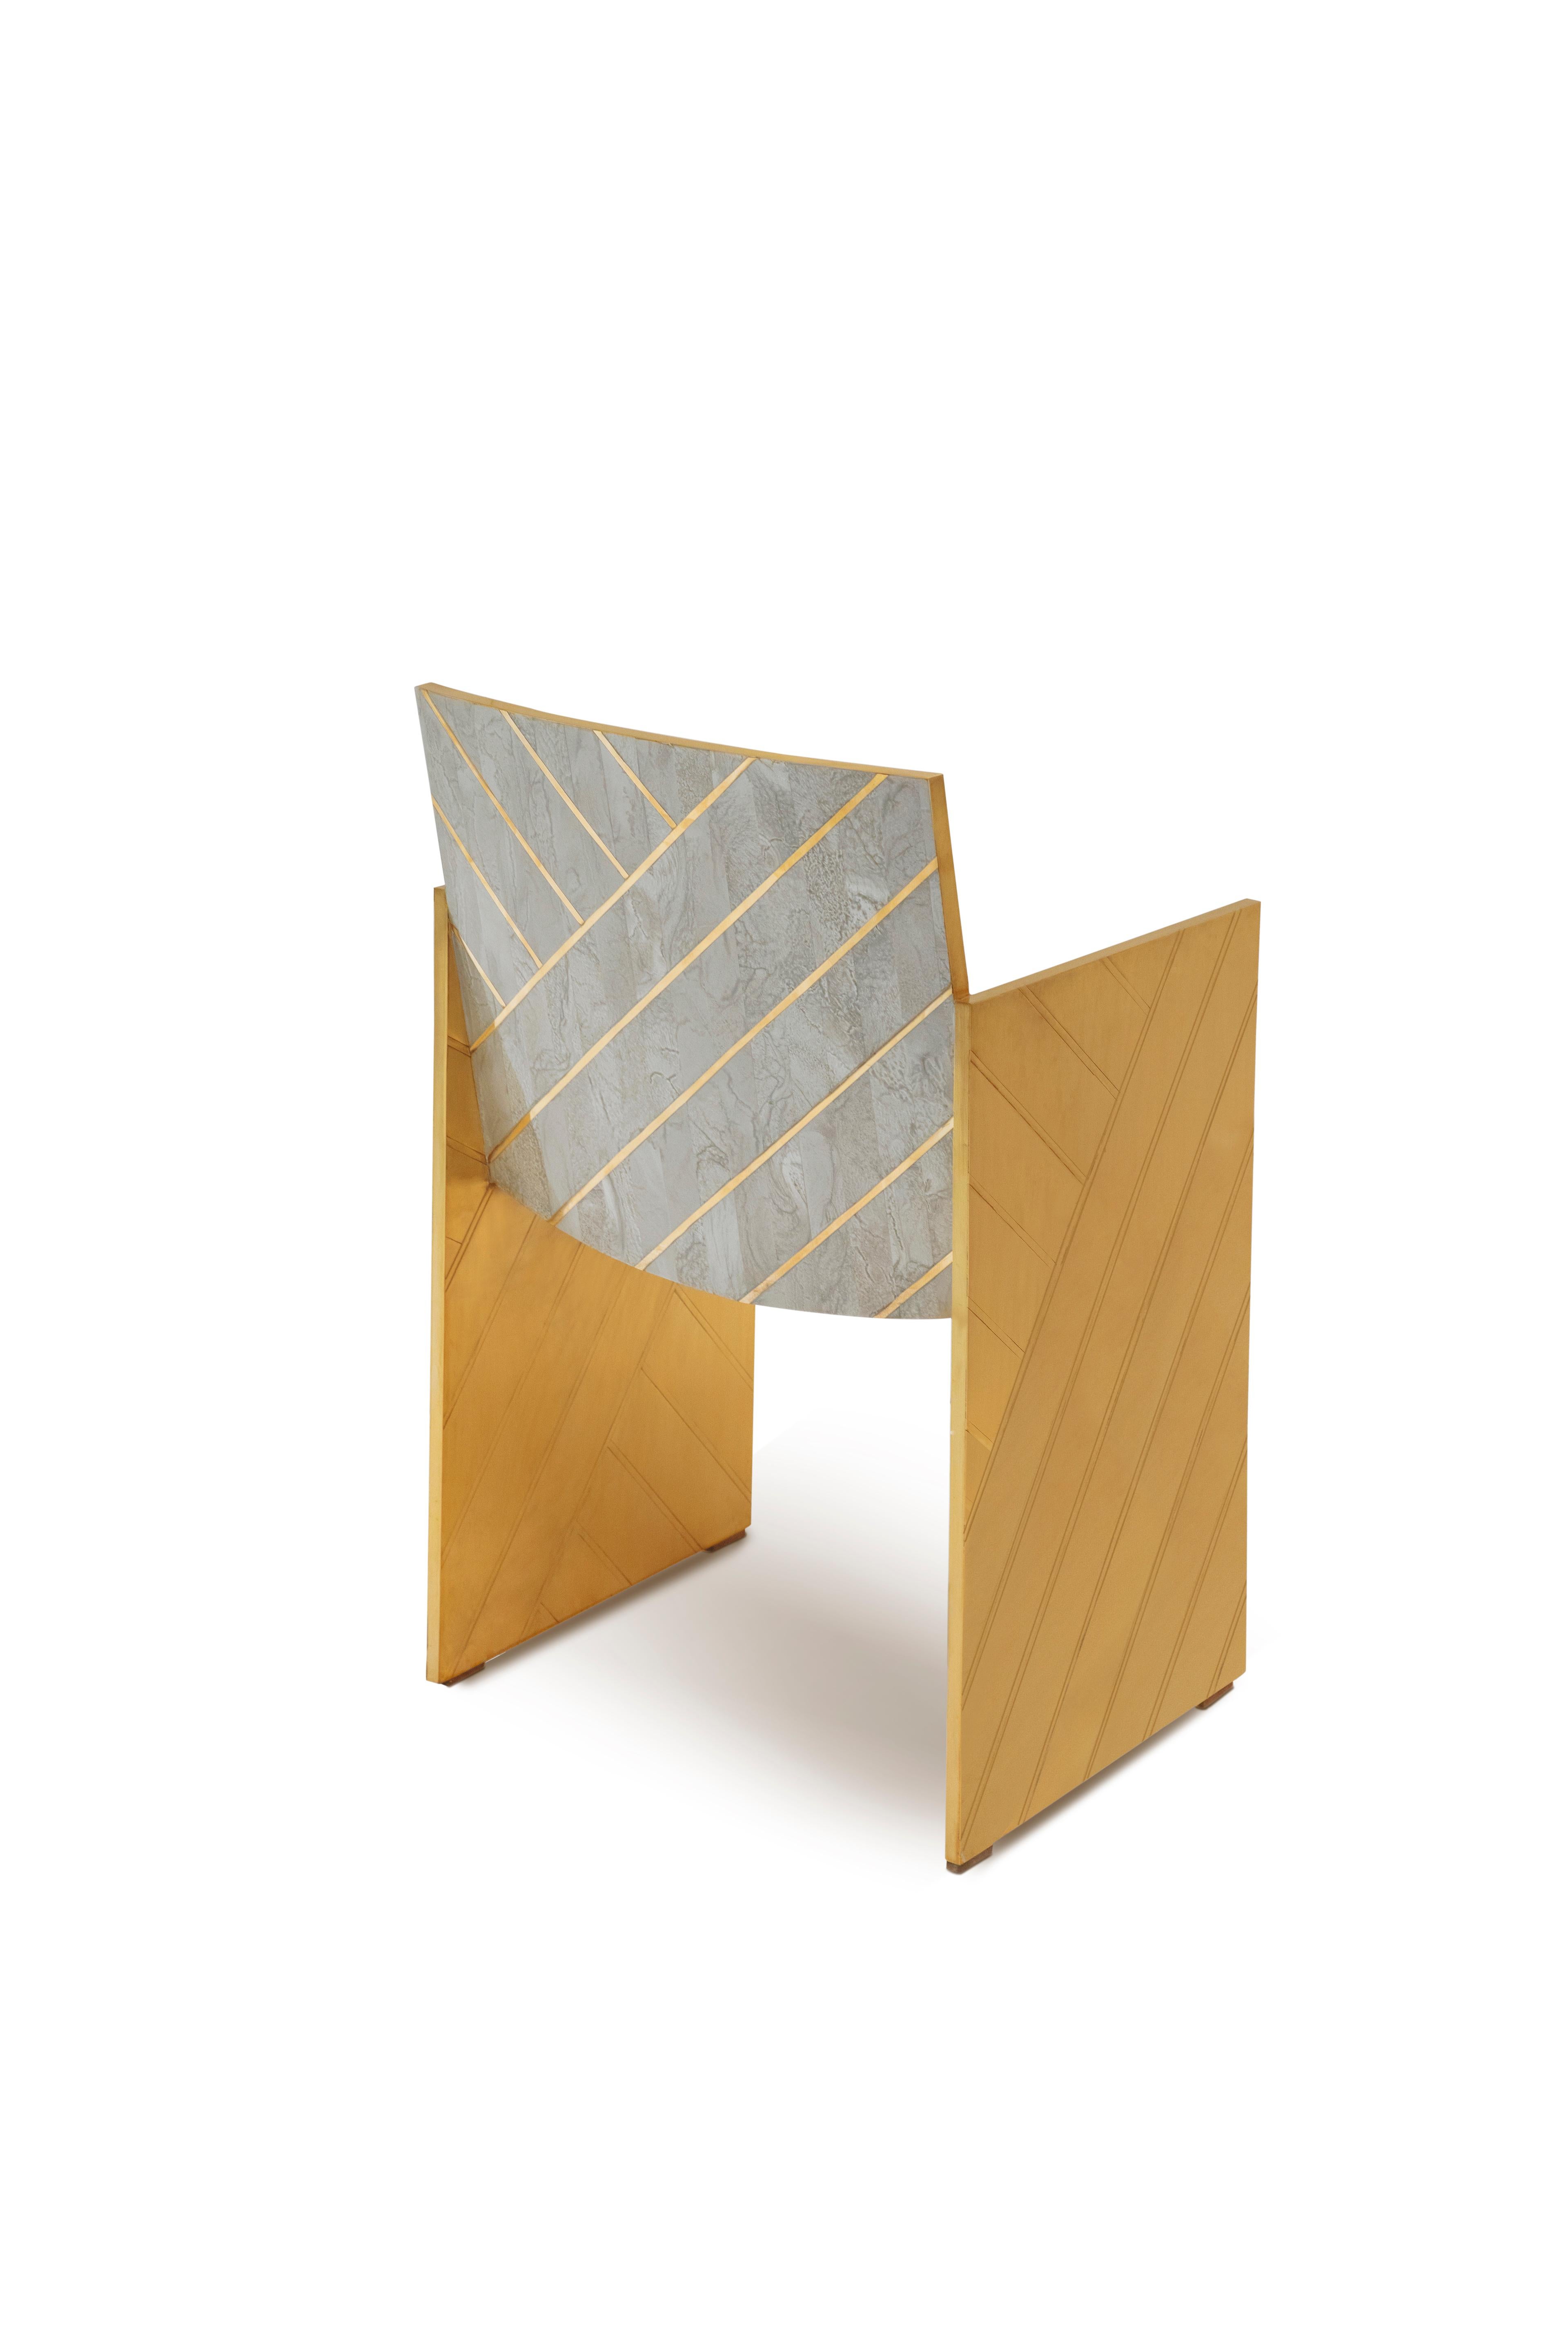 Nesso Gray Dining Chair with Brass Inlay by Matteo Cibic is a beautiful chair in pearly resin with geometric brass inlay. It can be matched beautifully with the Nesso dining table. It comes in three colors, beige, gray and mint.

Awarded designer